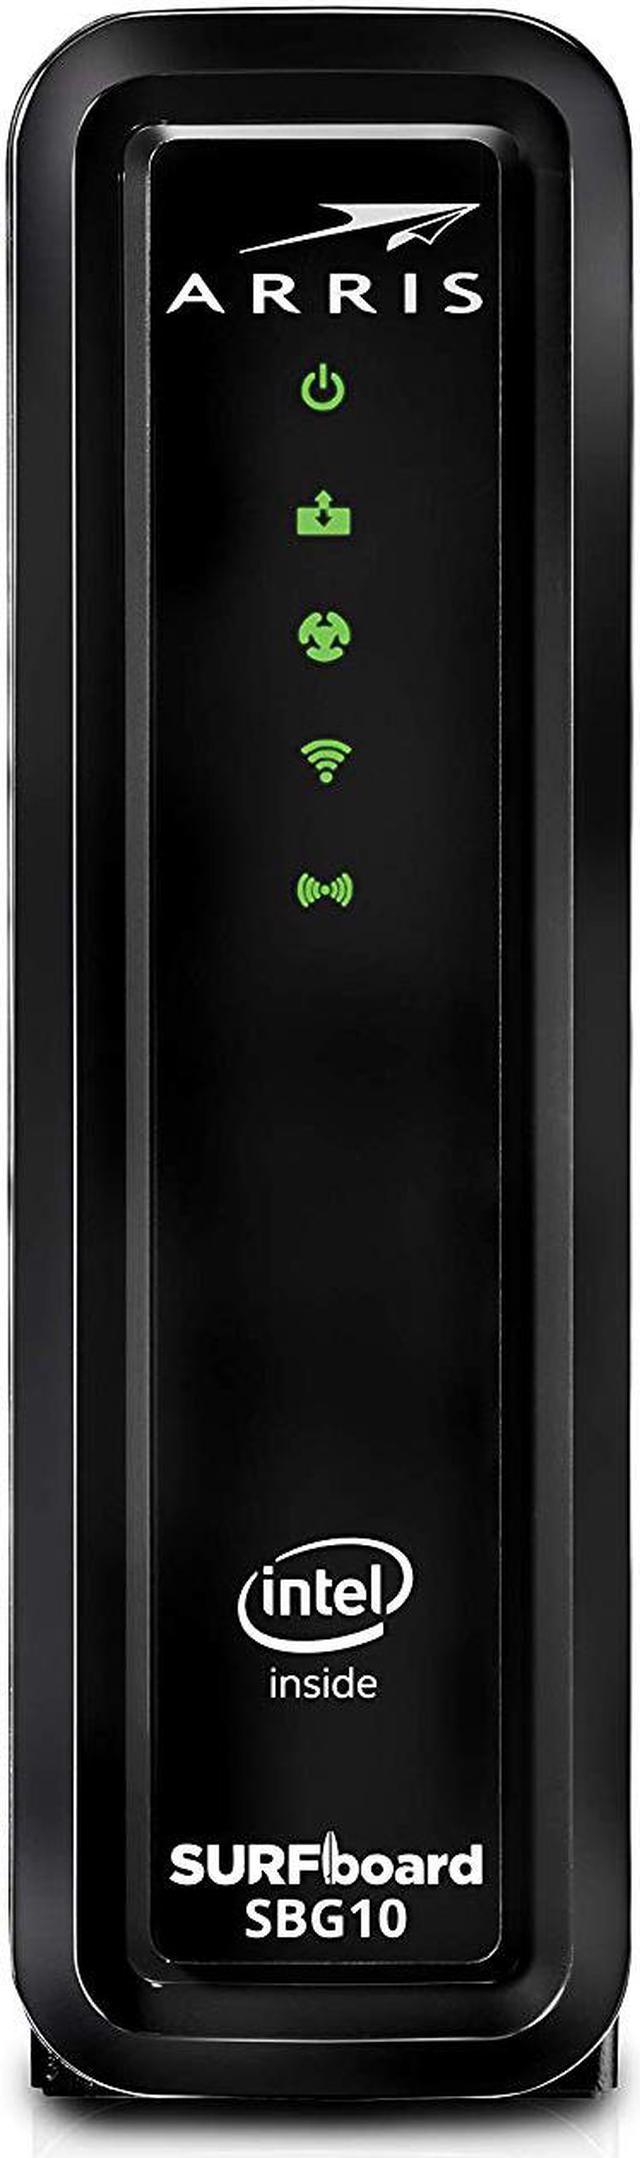 ARRIS SURFboard 16x4 Cable Modem / AC1600 Dual-Band WiFi Router. Approved  for XFINITY Comcast, Cox, Charter and most other Cable Internet providers  for plans up to 300 Mbps. 